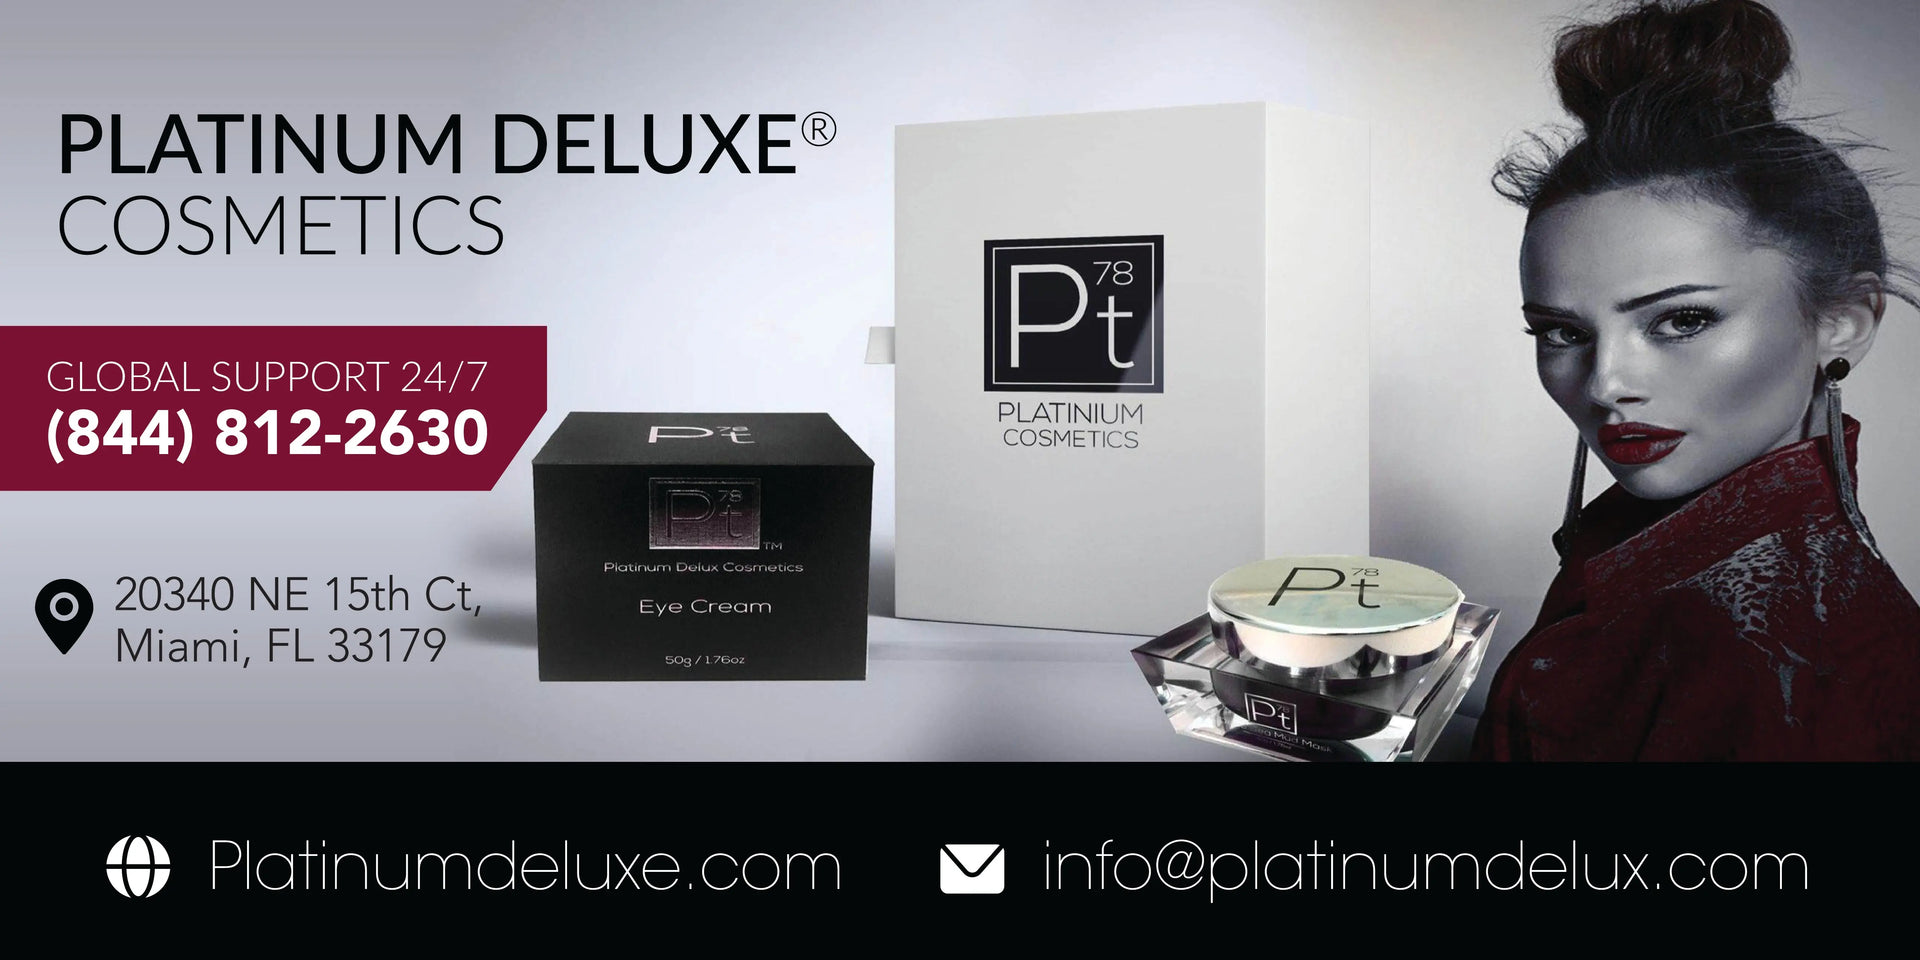 Take Care of Your Skin with Love Platinum Delux ®